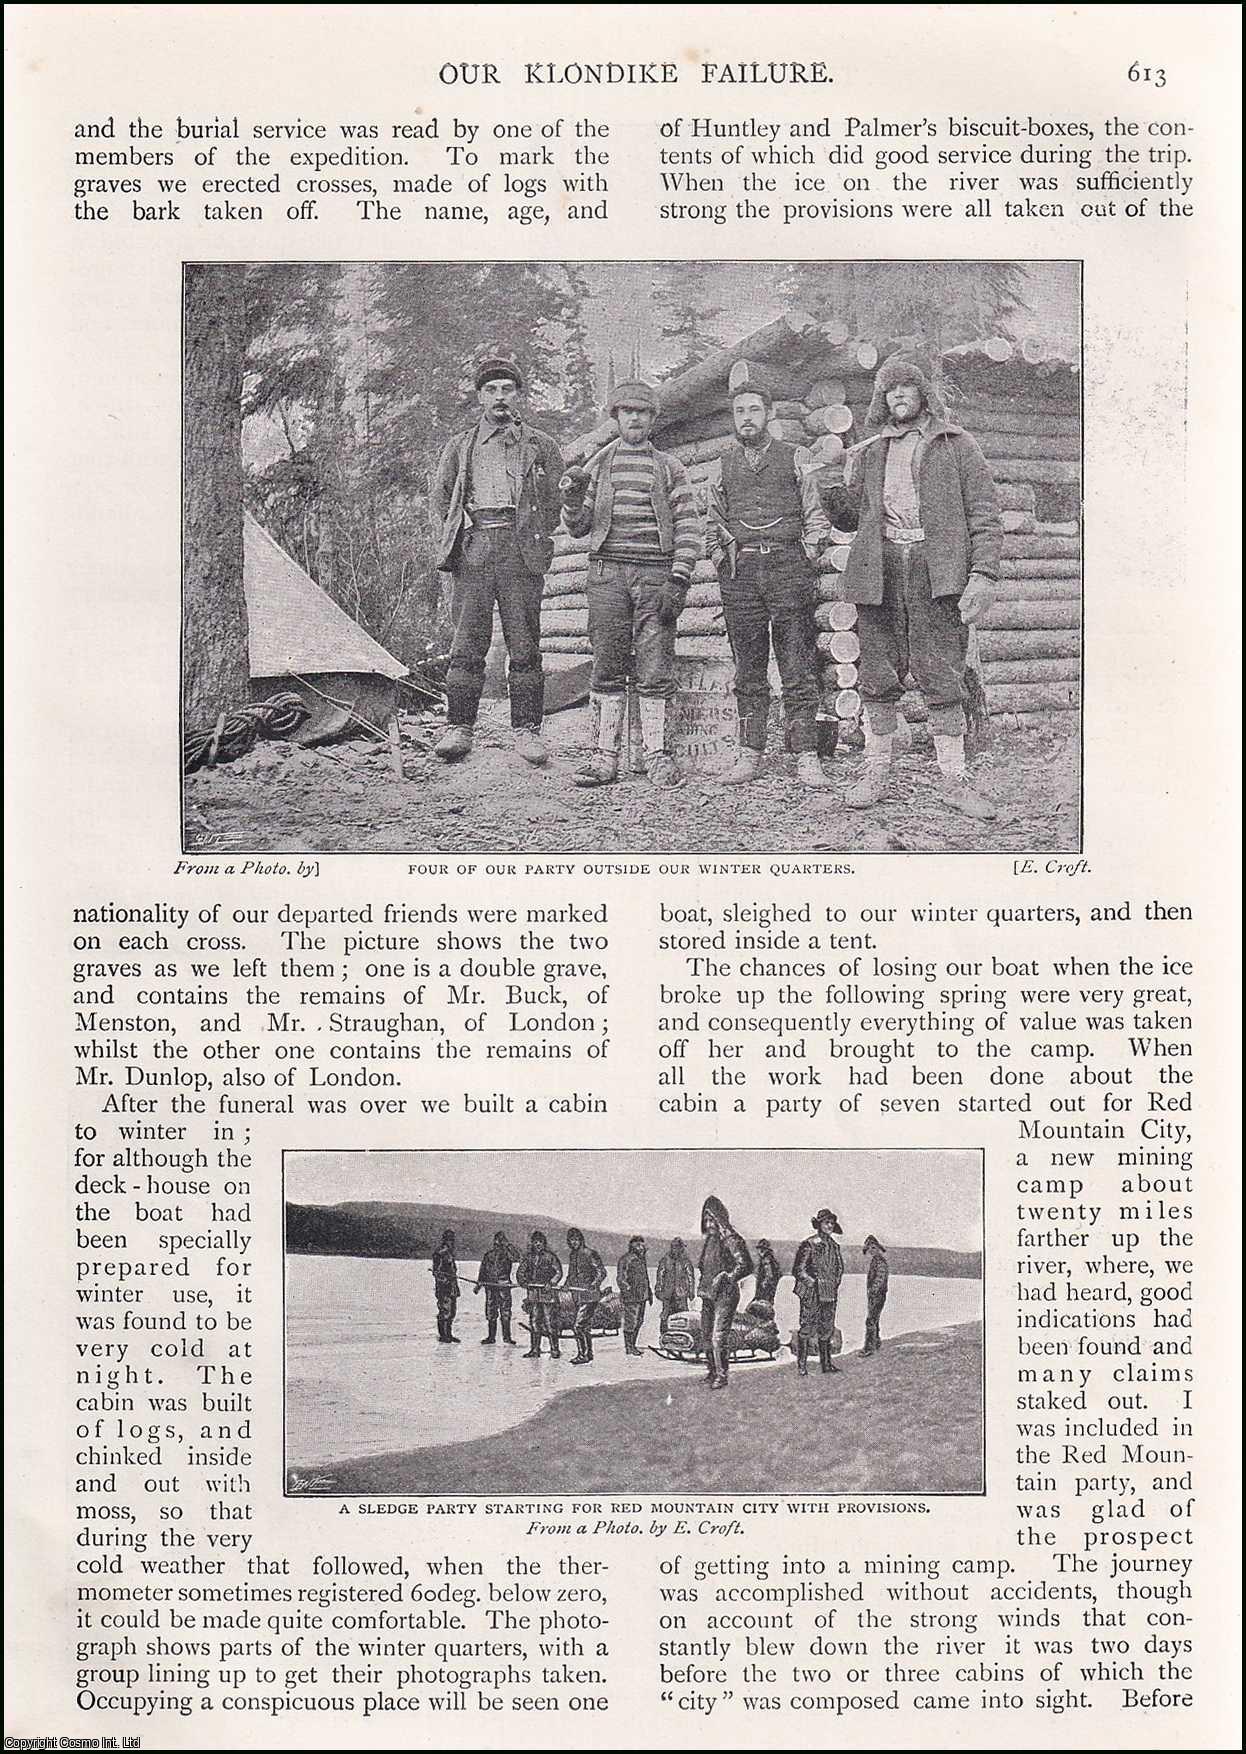 J. Hudson - Our Klondike Failure : a journey through the Alaskian Klondike in search of gold. An uncommon original article from the Wide World Magazine 1900.